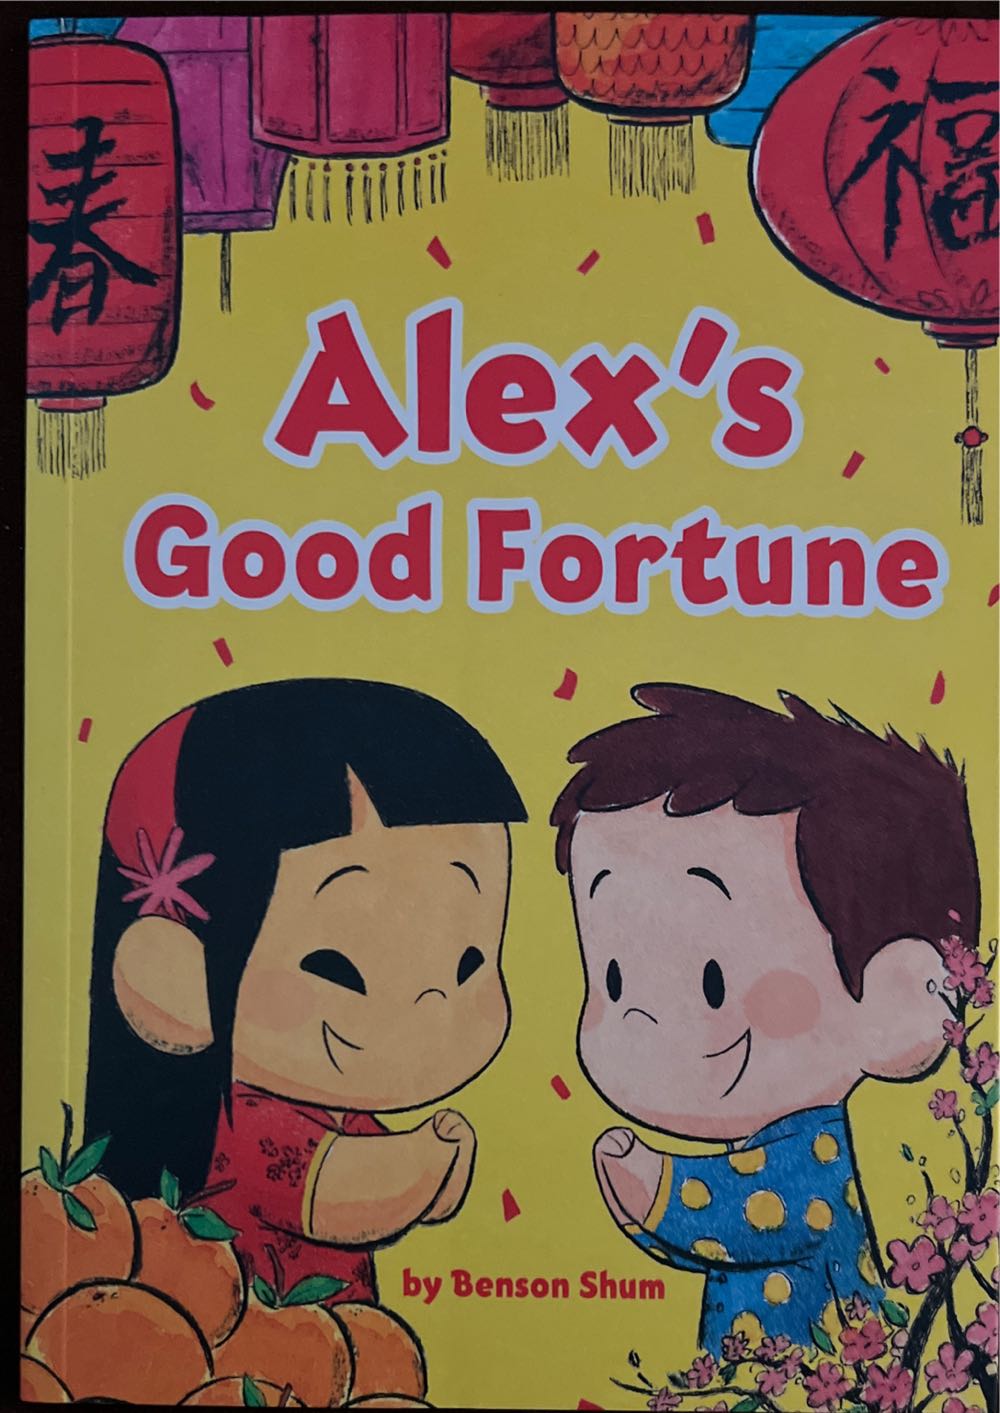 Alex’s Good Fortune  - Benson Shum (- Paperback) book collectible [Barcode 9780593521380] - Main Image 1